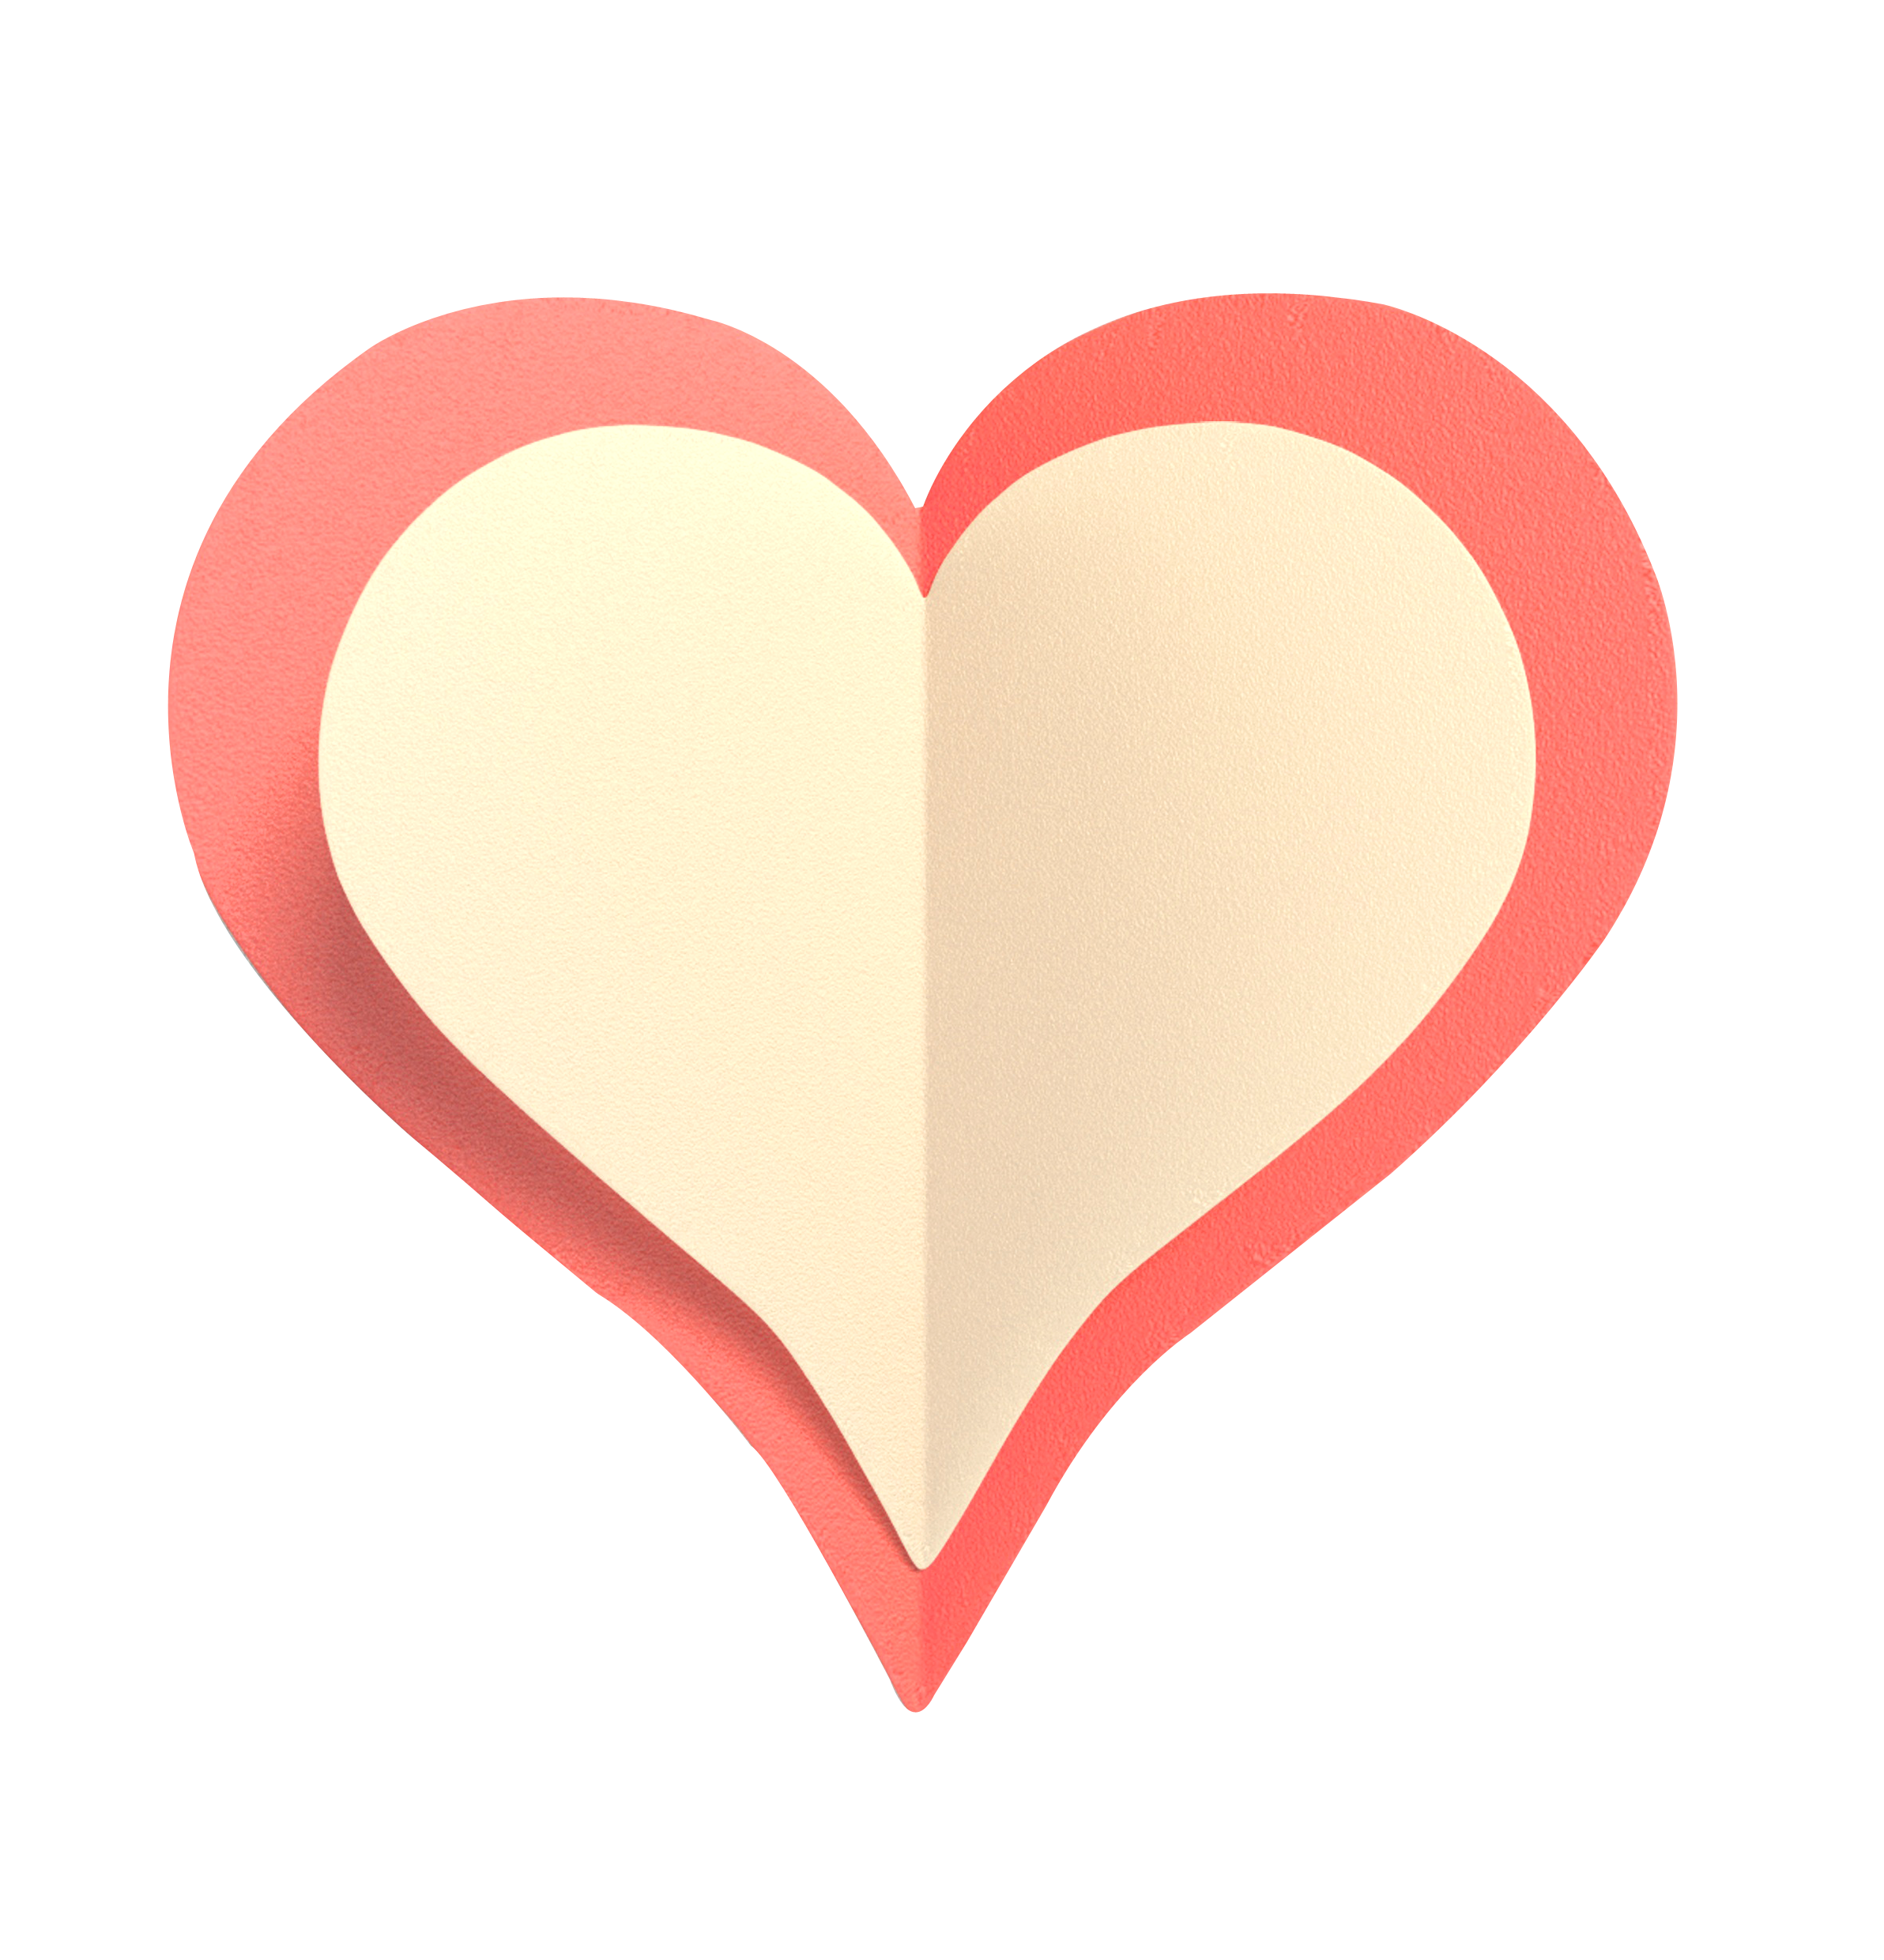 Heart Symbol Valentines Love Day Free Transparent Image HD Clipart